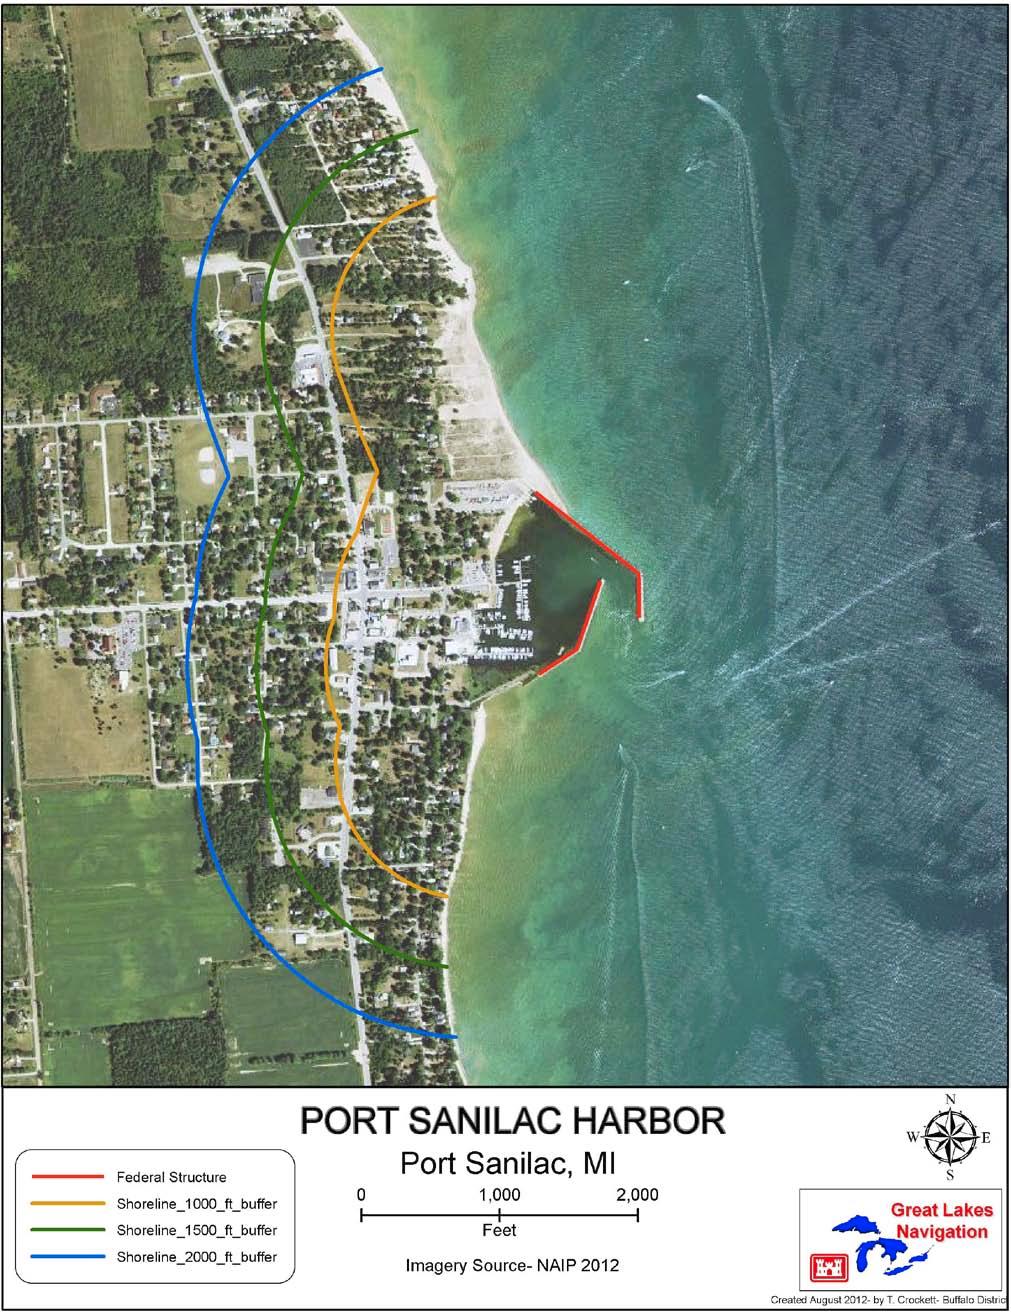 Potential Impact Area: The following graphic displays property parcels that could be impacted within various zones defined by different setbacks from the shoreline behind existing Federal